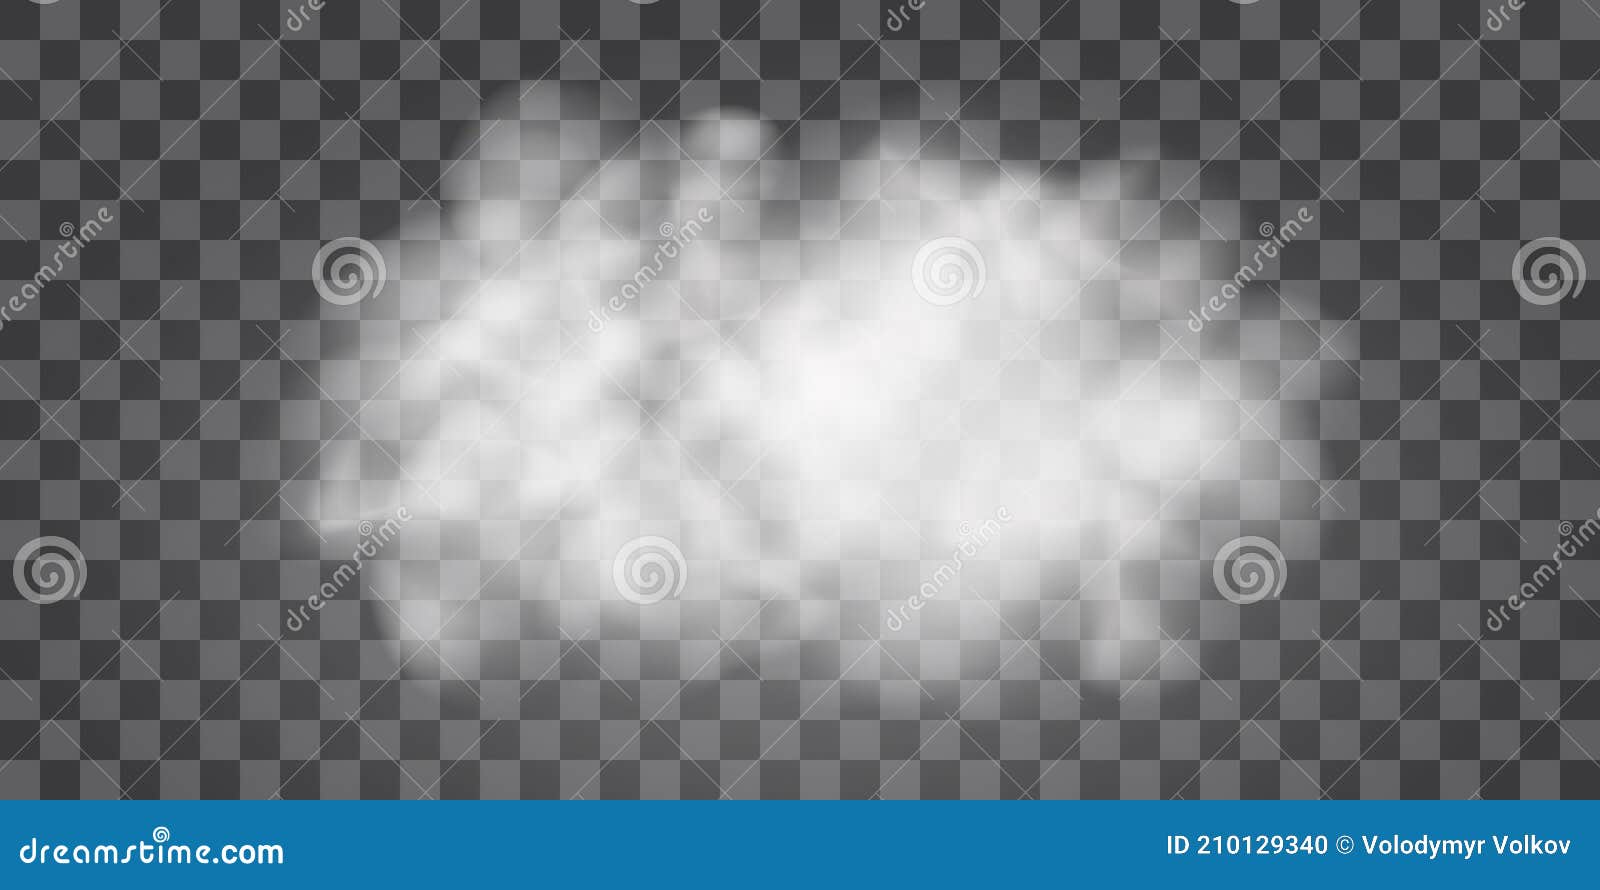 Lv PNG, Vector, PSD, and Clipart With Transparent Background for